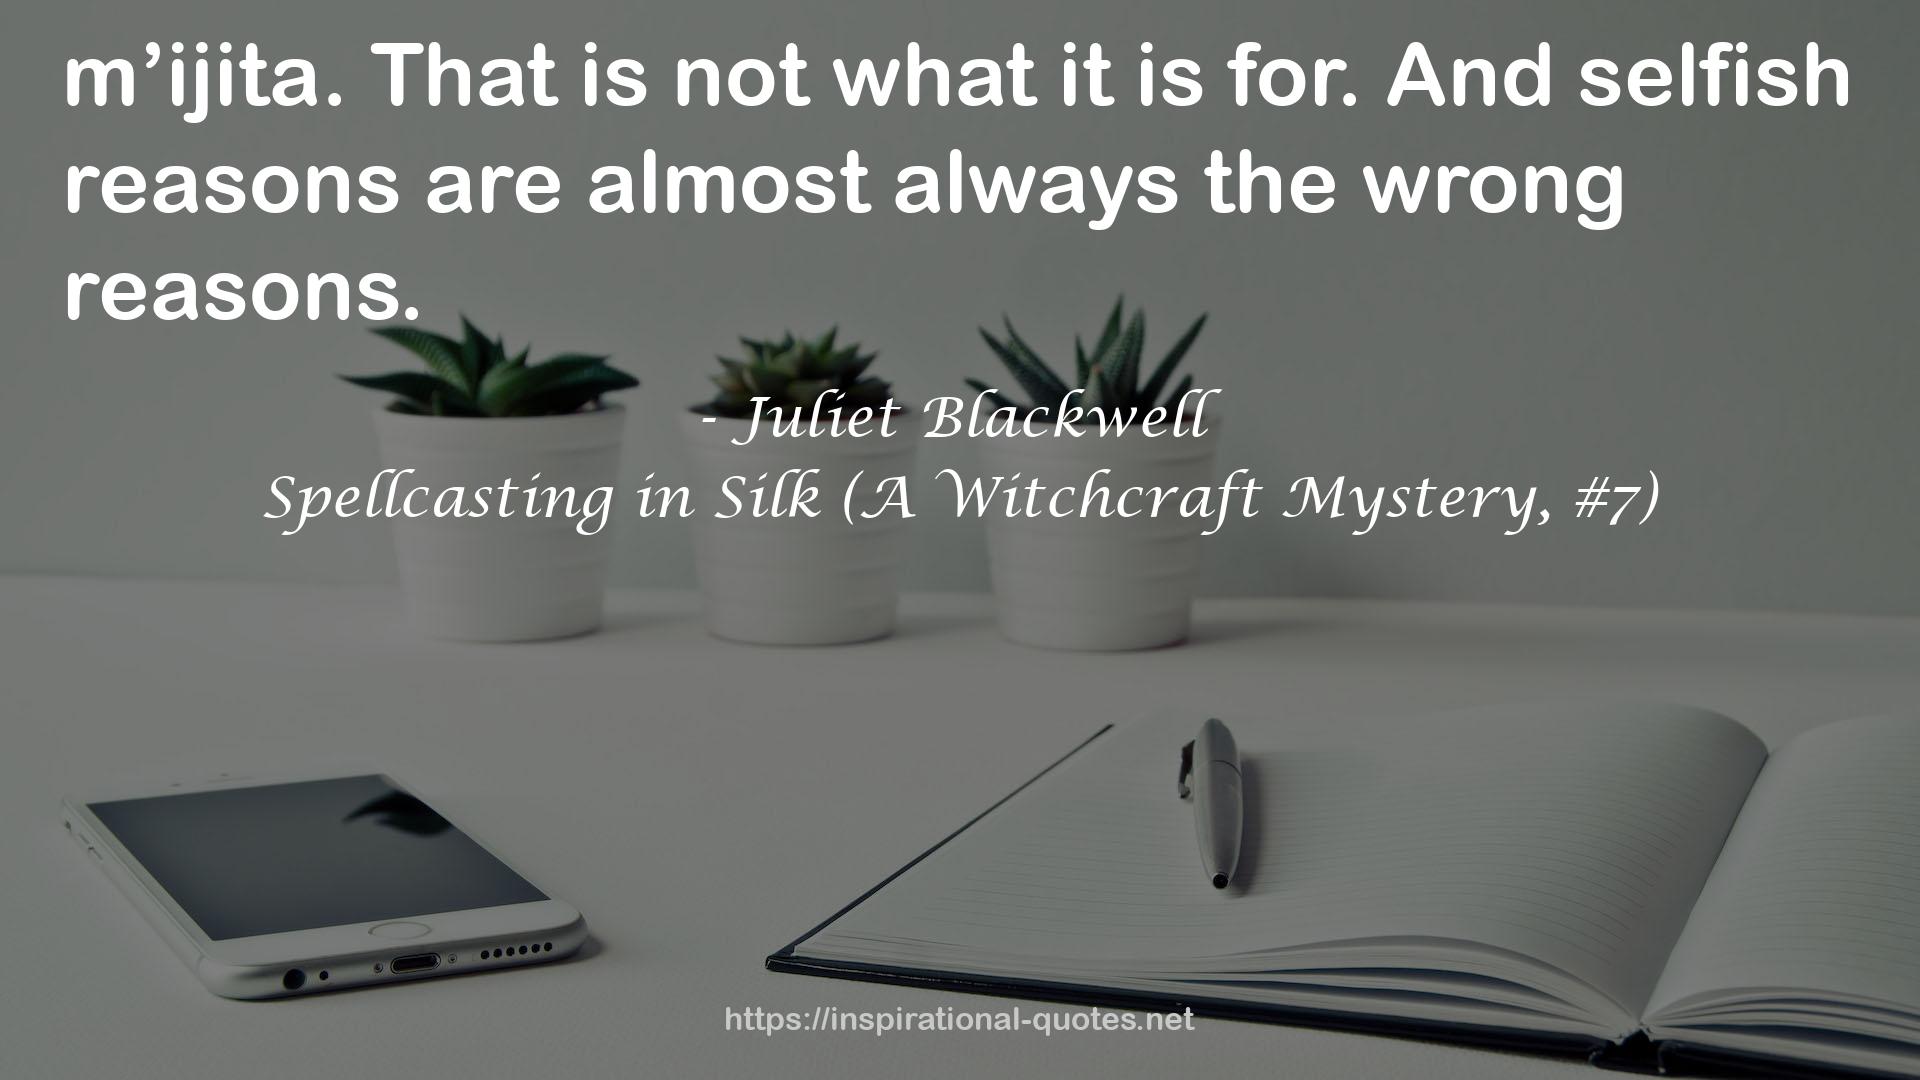 Juliet Blackwell QUOTES